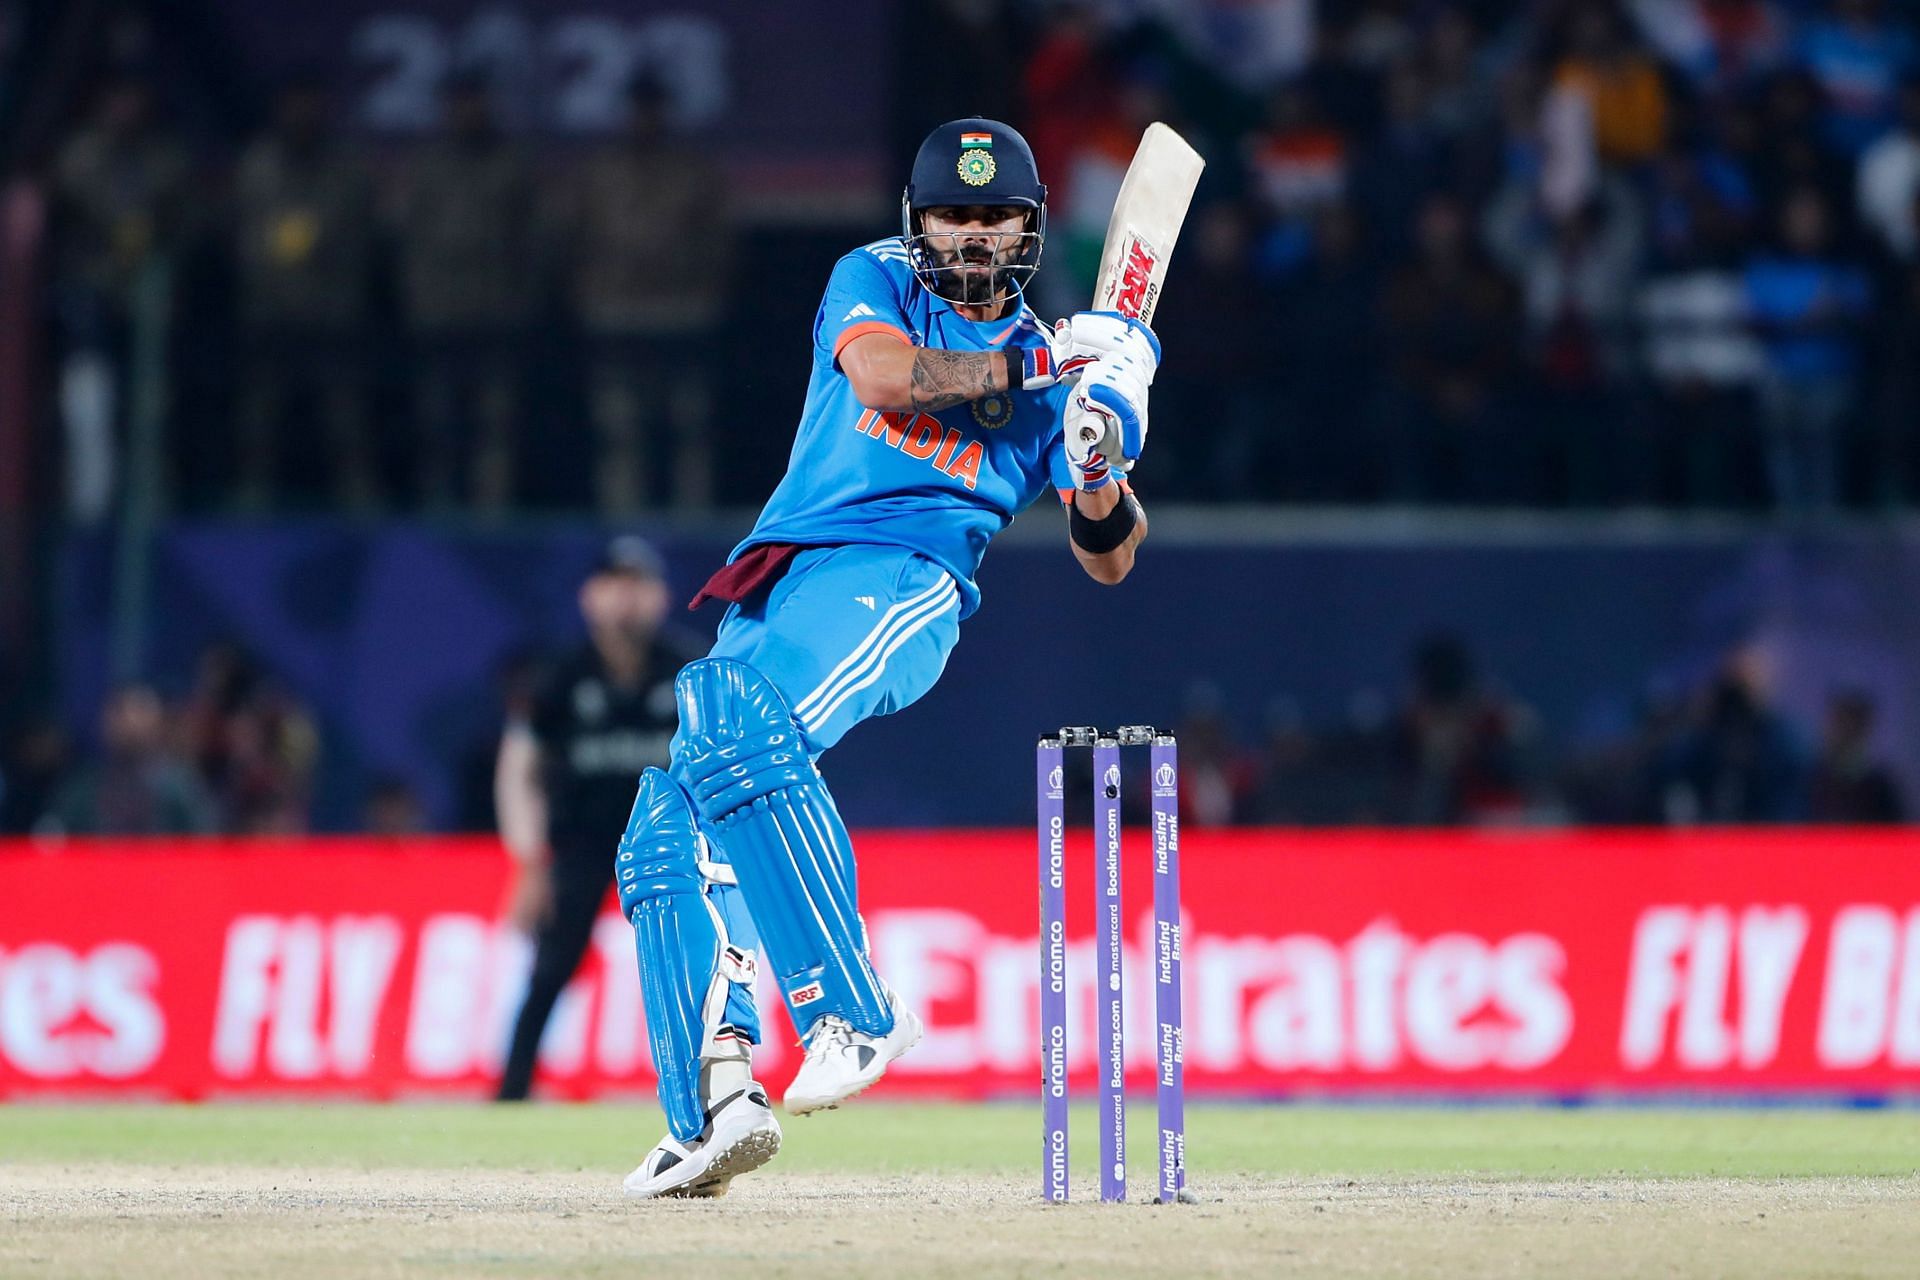 Virat Kohli played a crucial knock vs New Zealand in Dharamsala. [Getty Images]